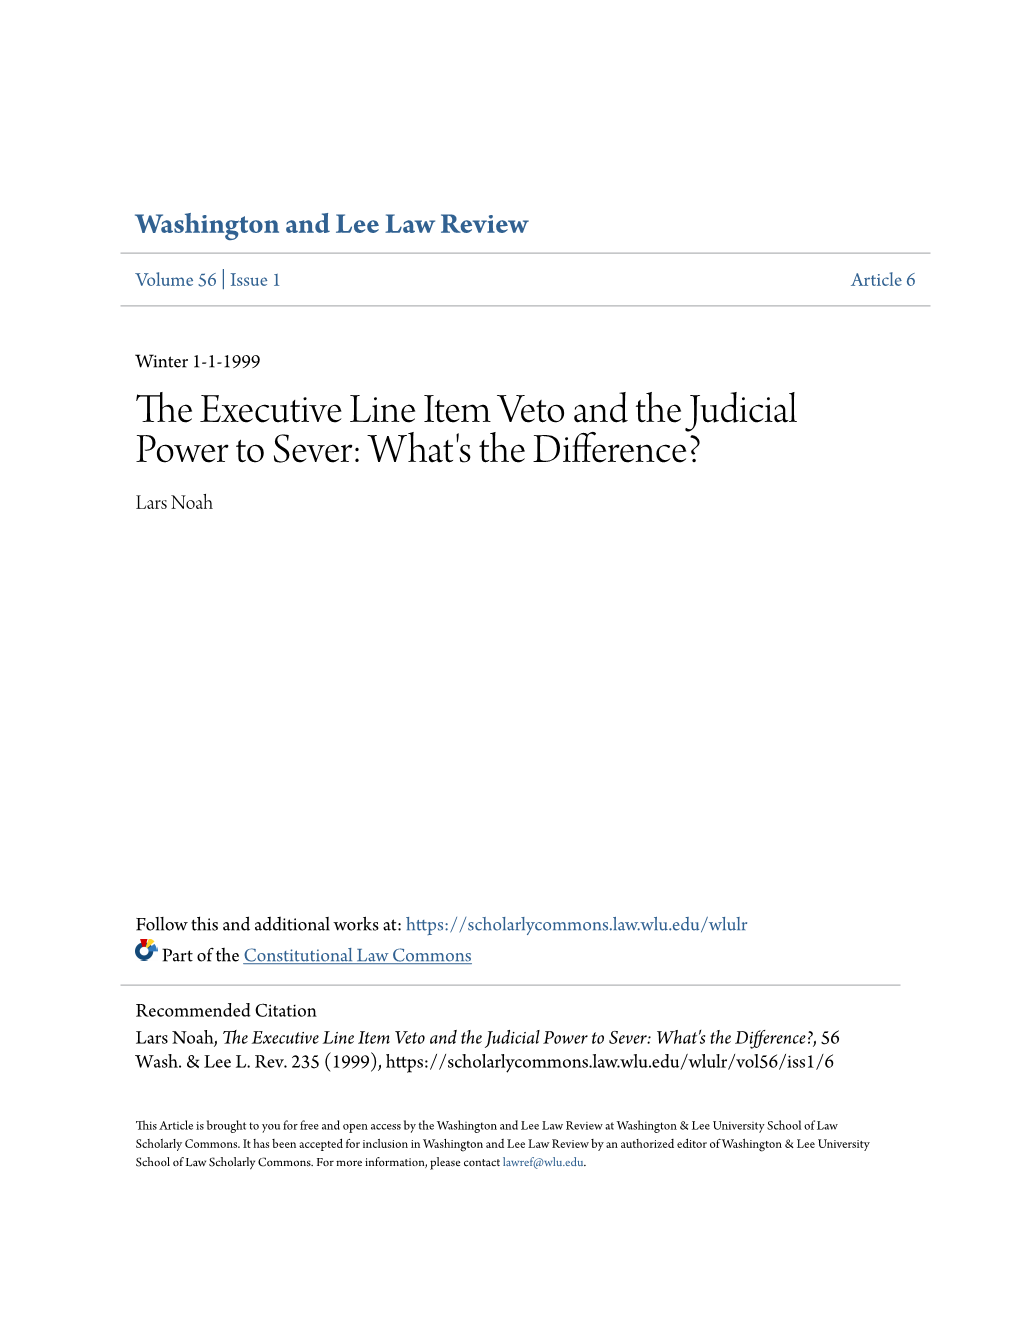 The Executive Line Item Veto and the Judicial Power to Sever: What's the Difference? Lars Noah